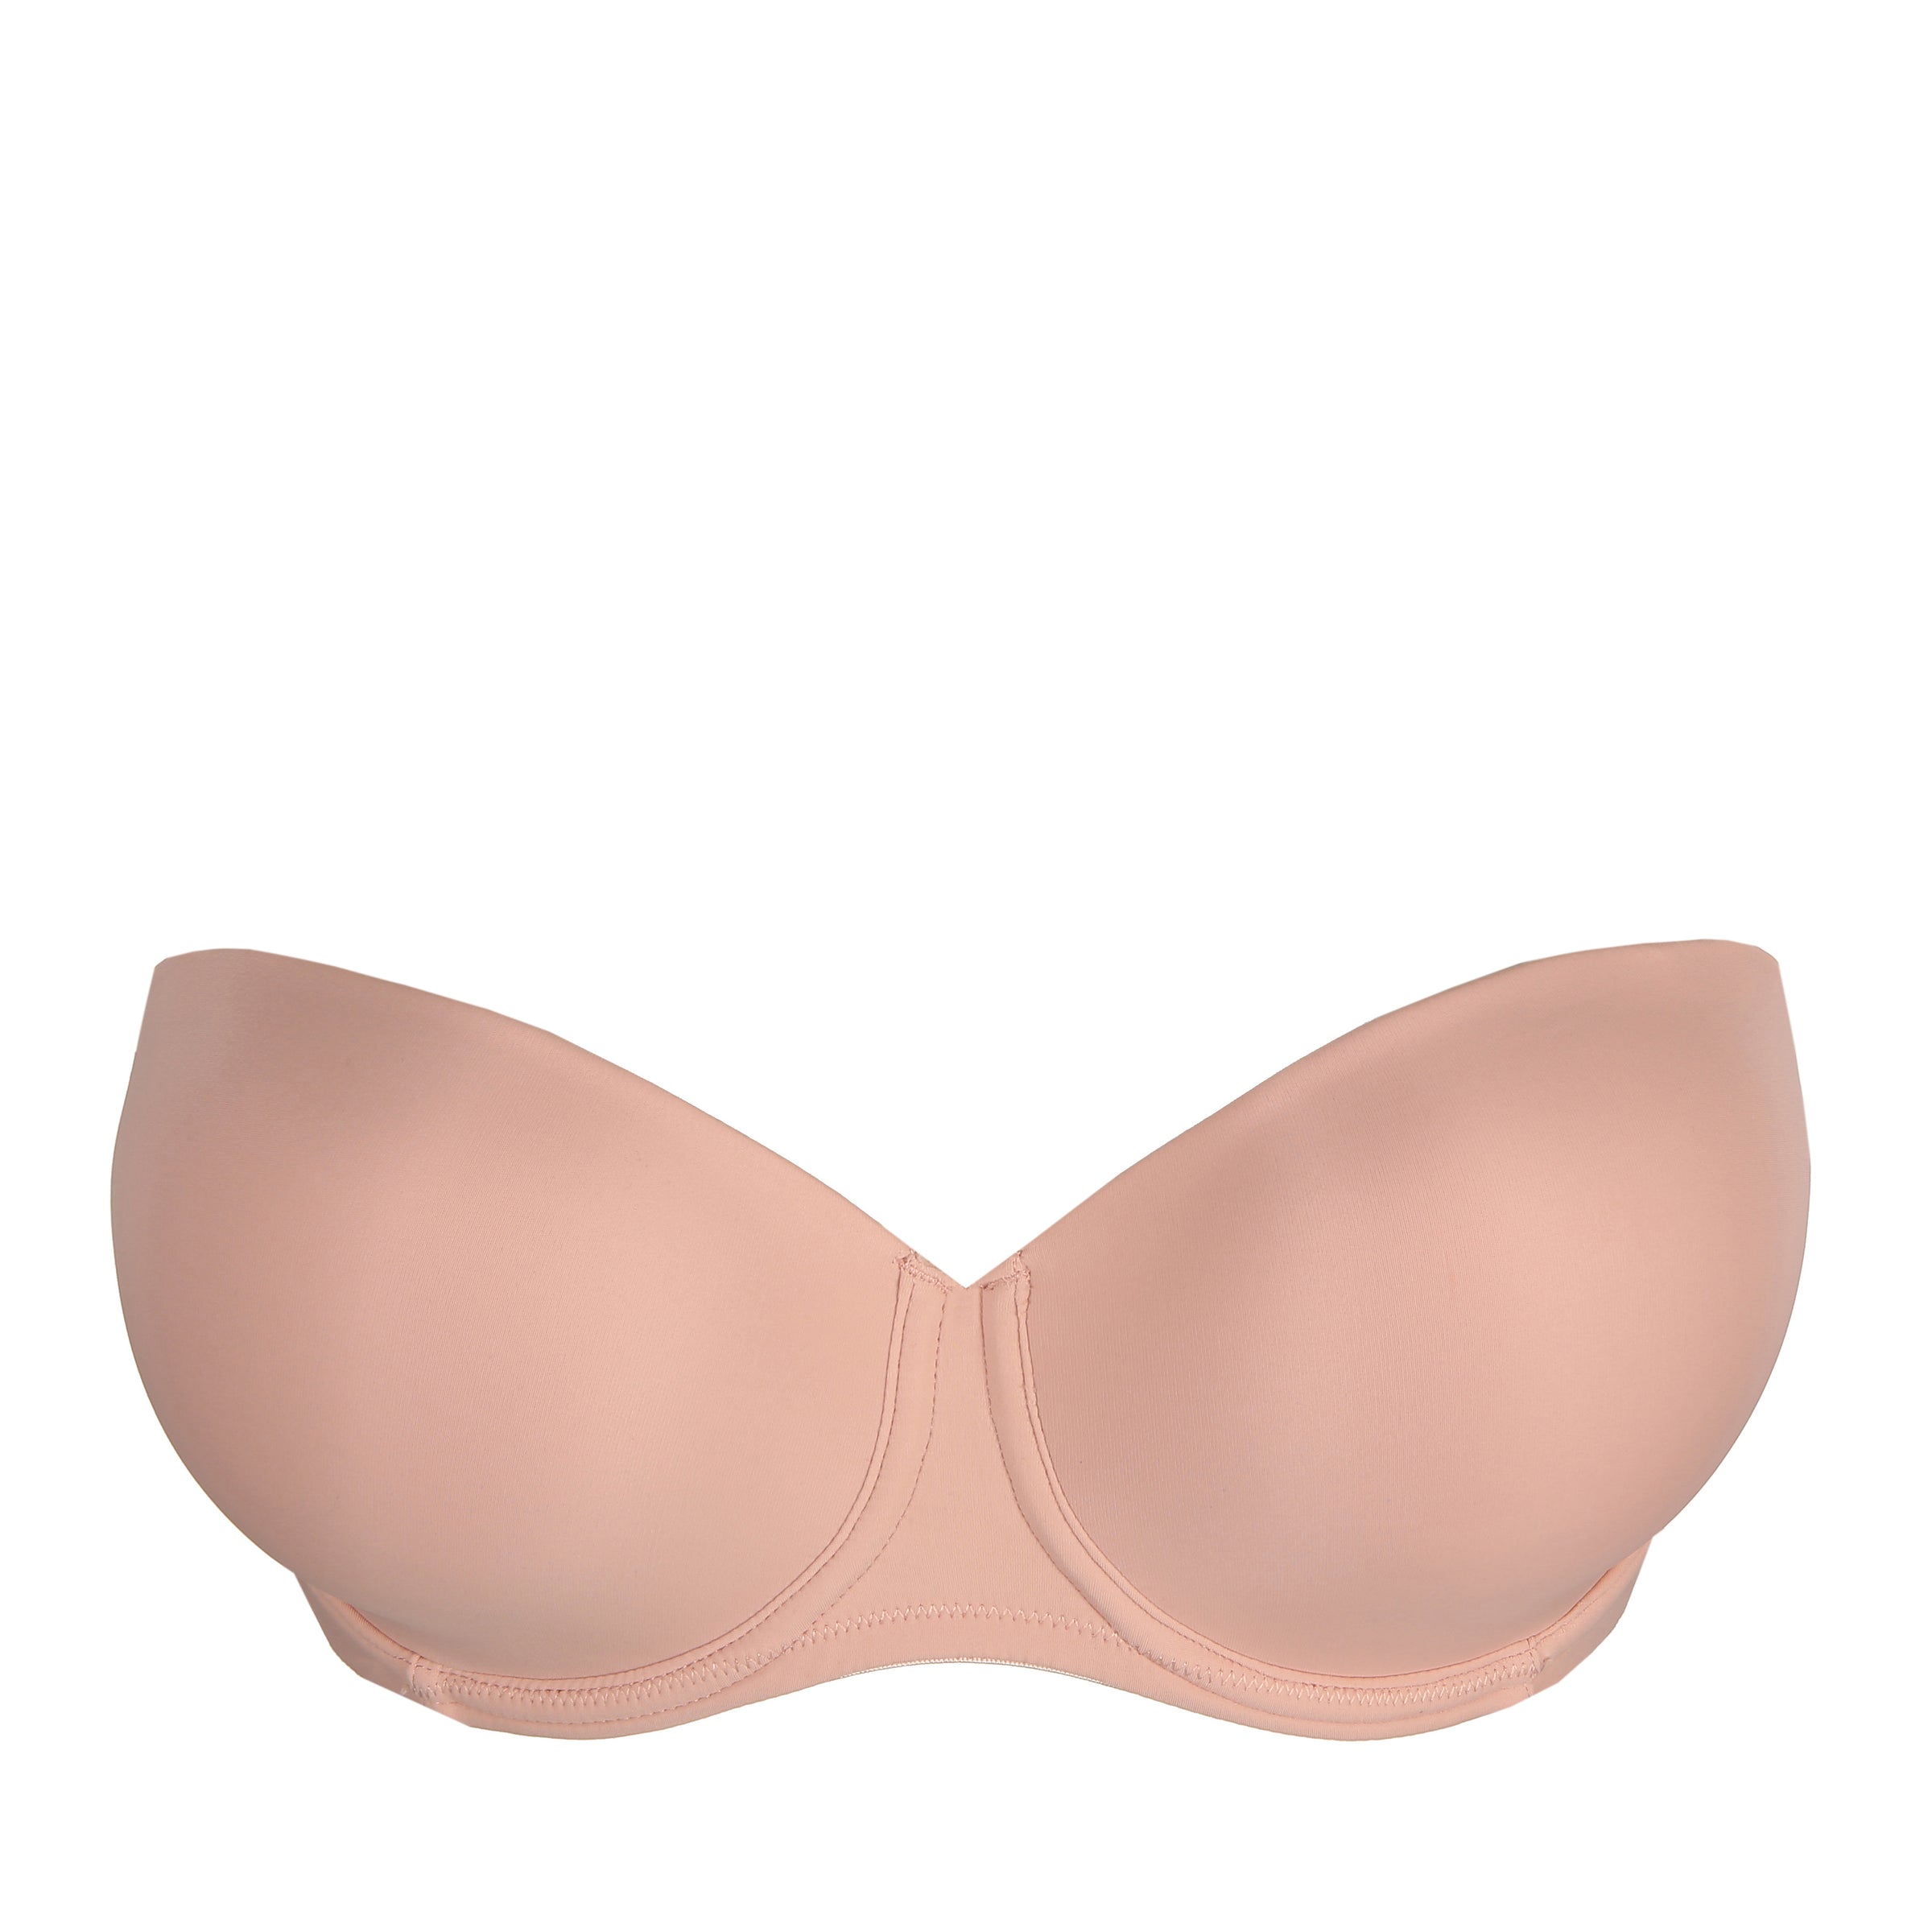 Underwire for Full Figure Figure Types in 36F Bra Size by Prima